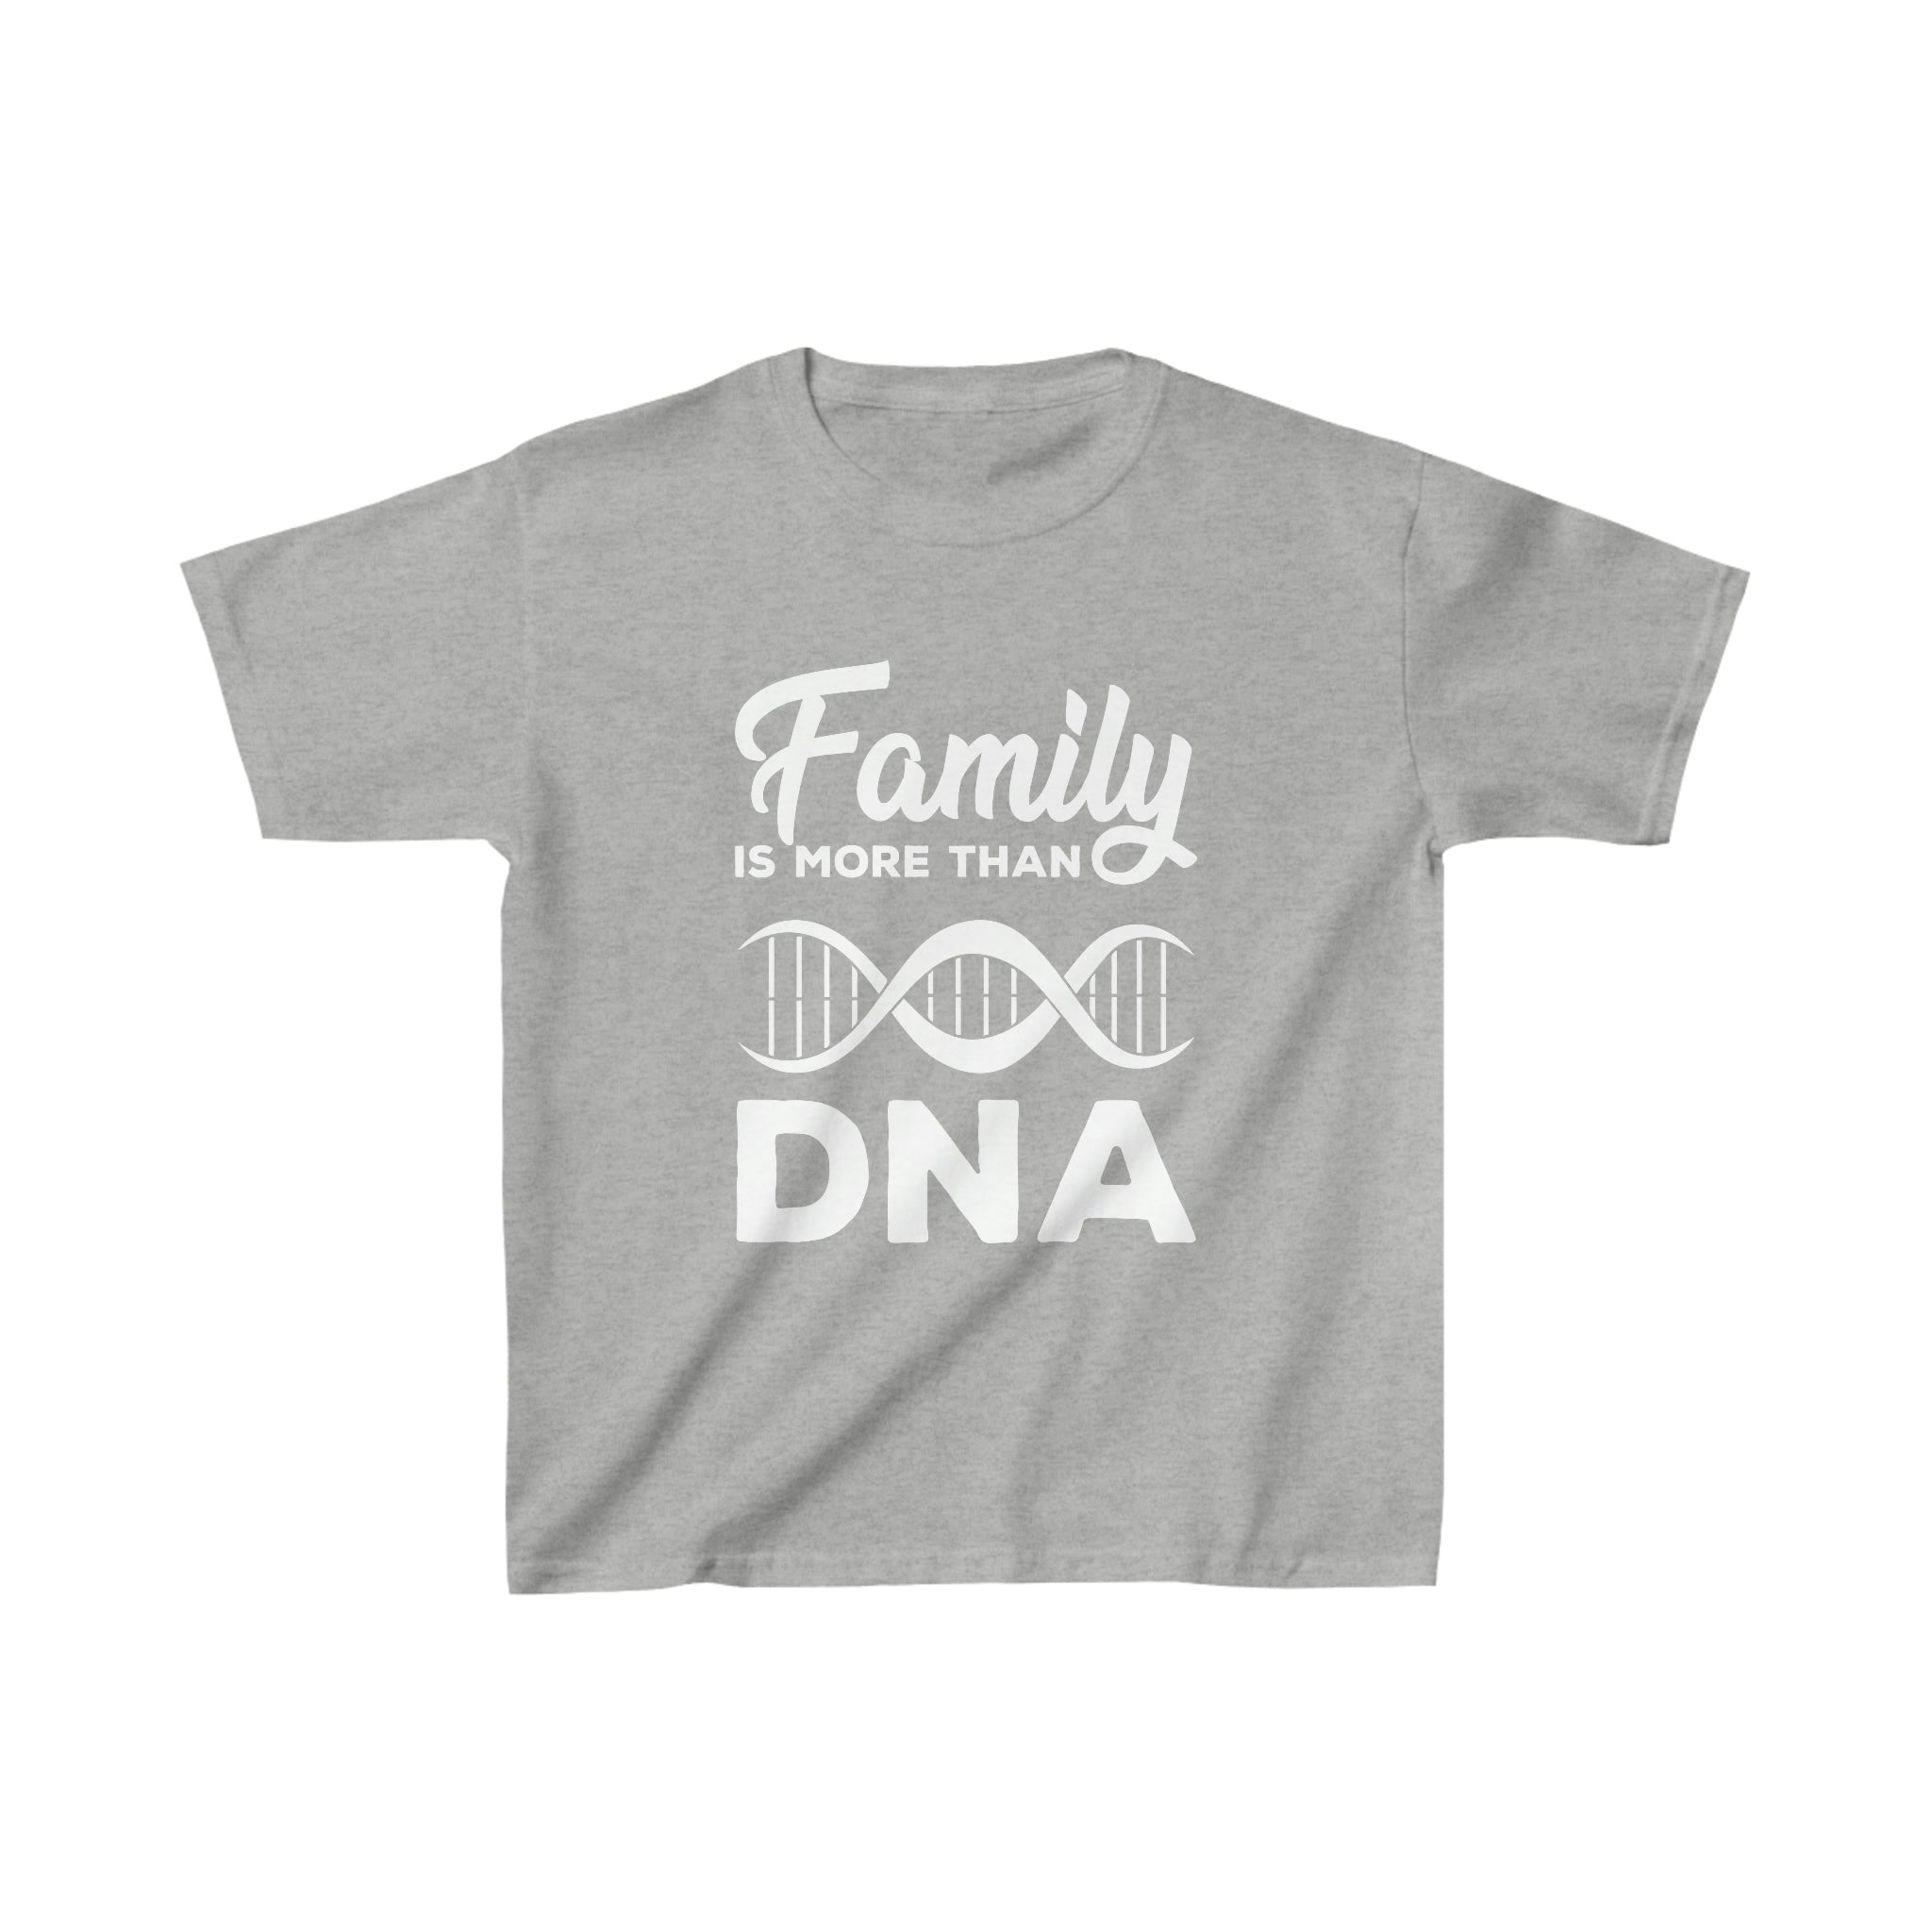 Family is more than DNA - Kids T-shirt